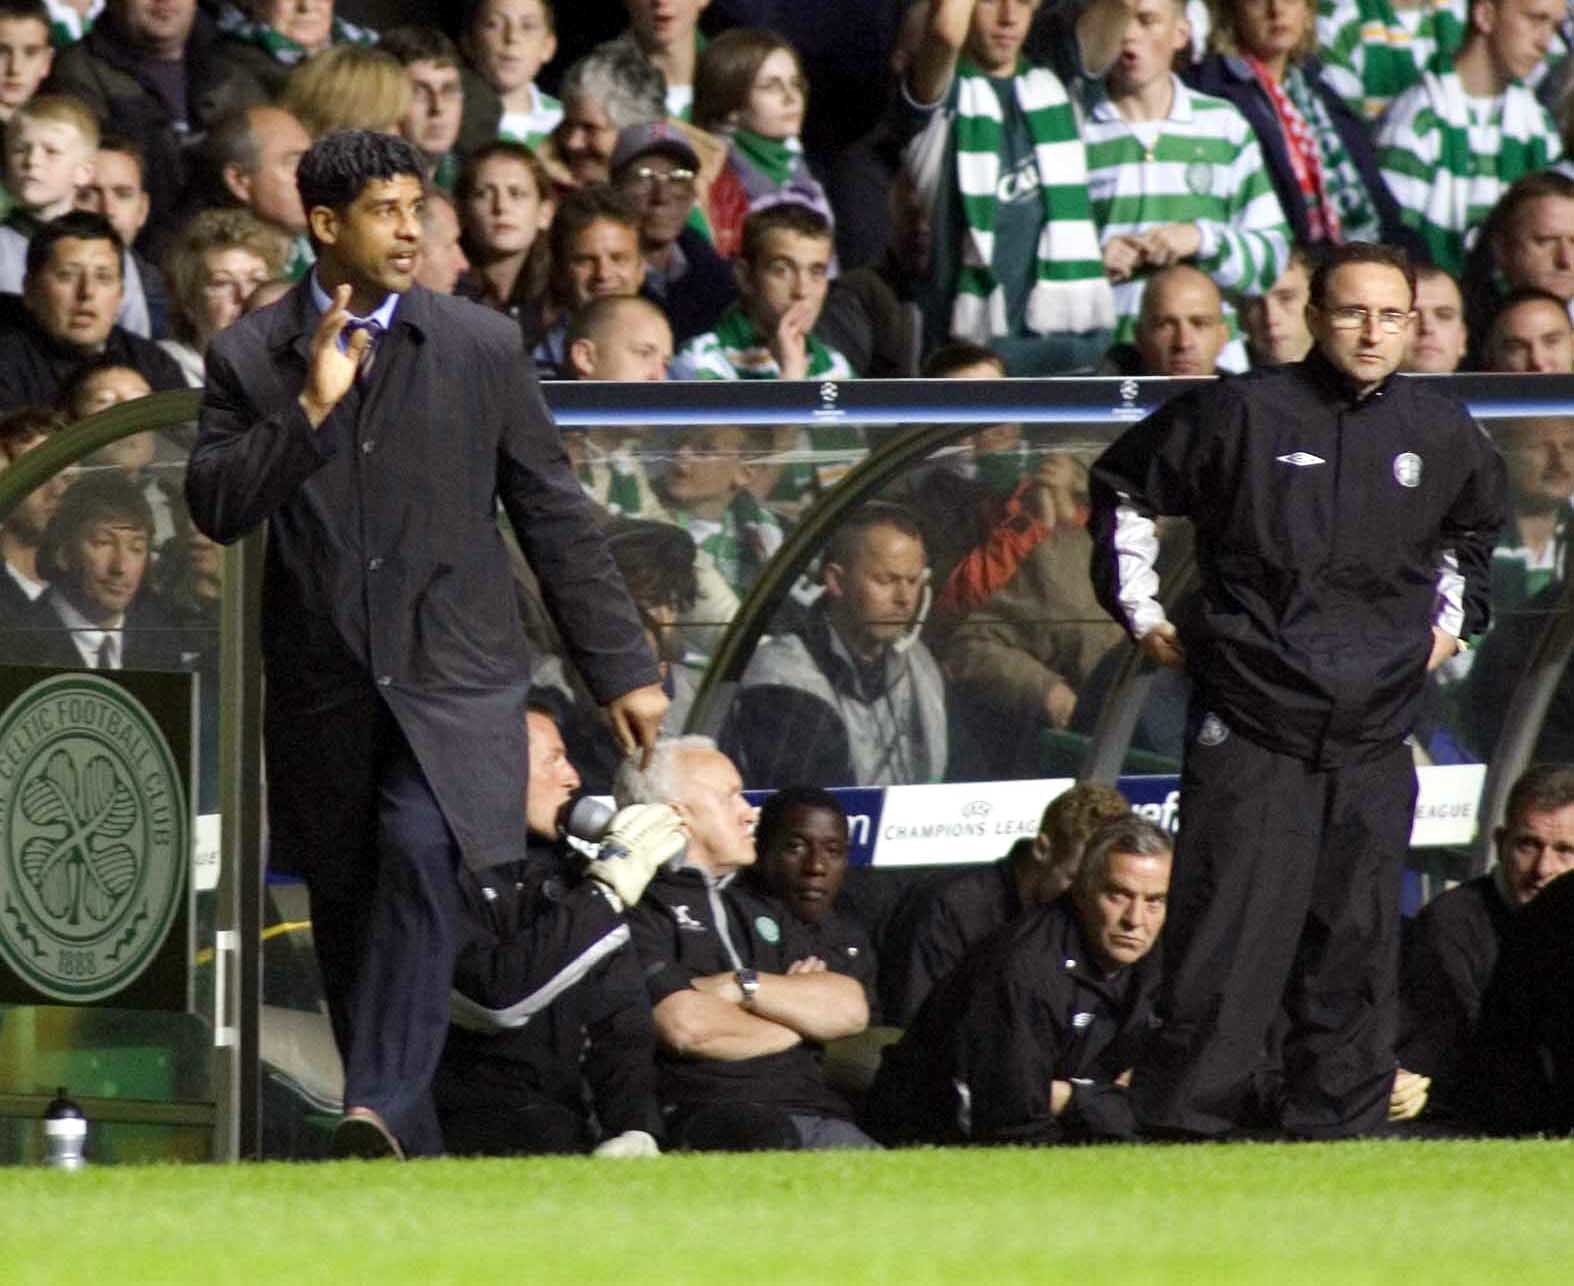 14/09/04 CHAMPIONS LEAGUE CELTIC v BARCELONA (1-3) CELTIC PARK - GLASGOW Barcelona manager Frank Rijkaard (left) and his Celtic counterpart Martin ONeill study the game unfolding.